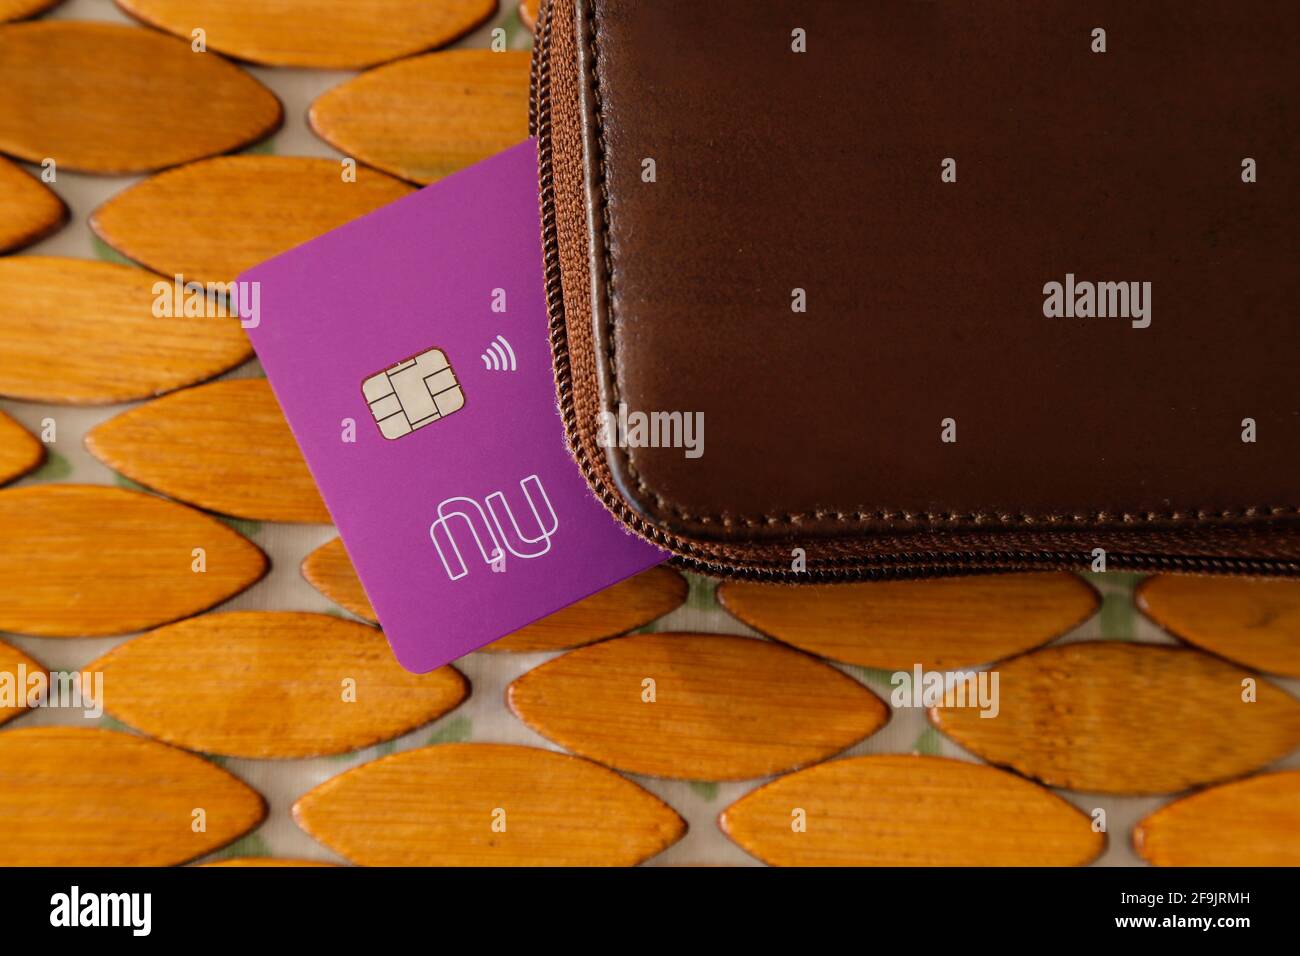 Minas Gerais, Brazil - January 19, 2021: purple credit card with Nubank logo and leather wallet. Form of payment. Stock Photo